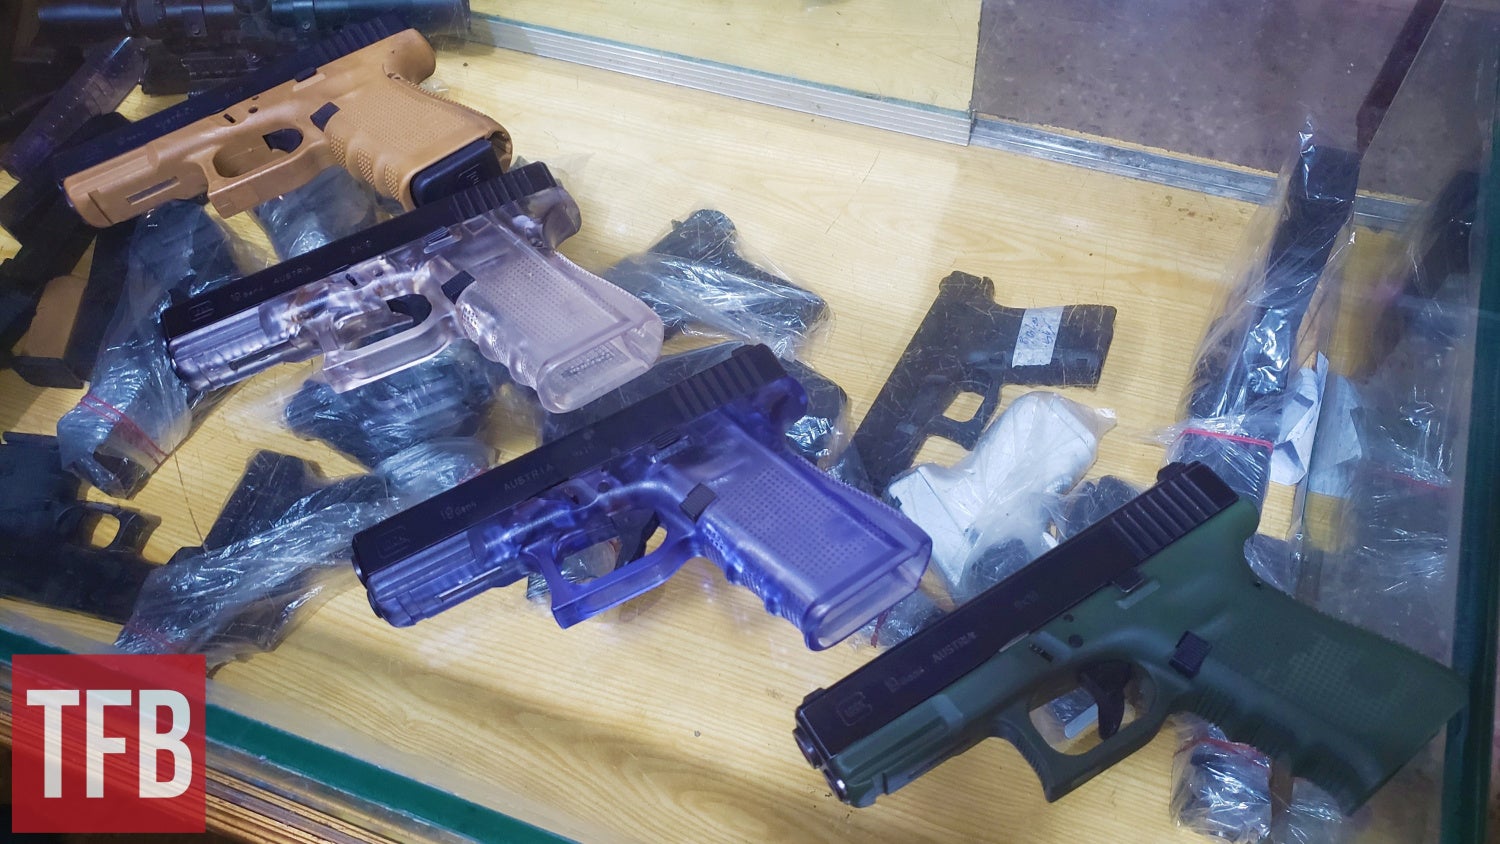 The selection of Glock copies at the guns shop in Peshawar